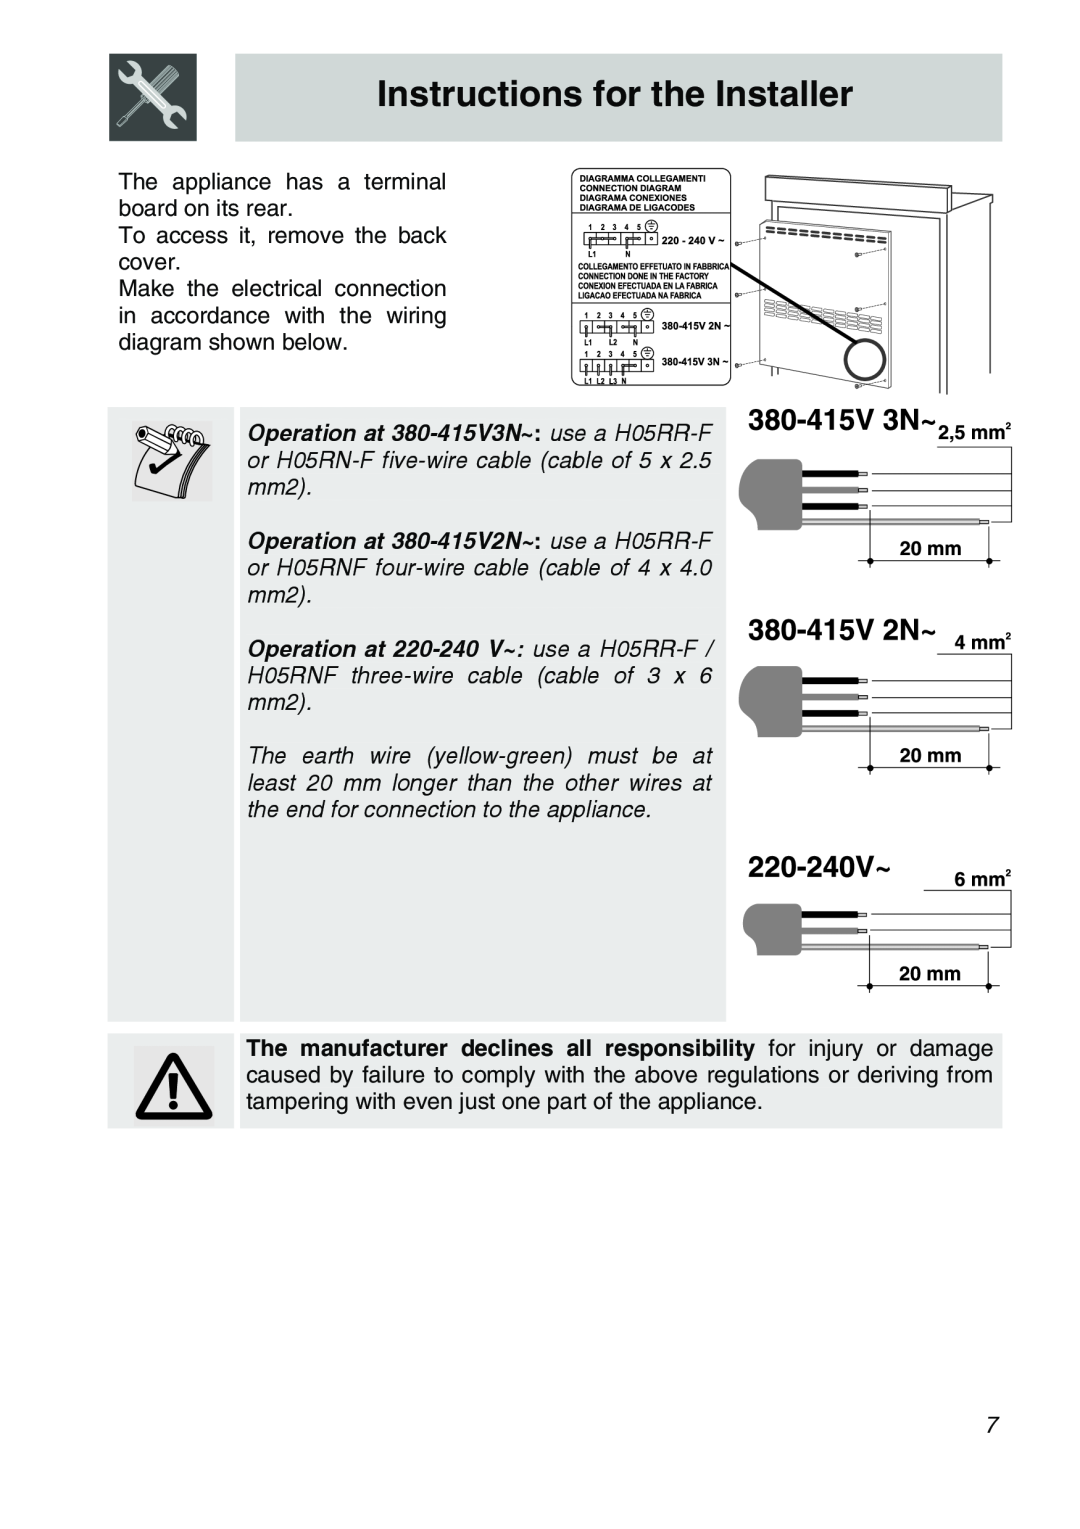 Smeg CSA150X-6 manual Instructions for the Installer, The appliance has a terminal board on its rear 